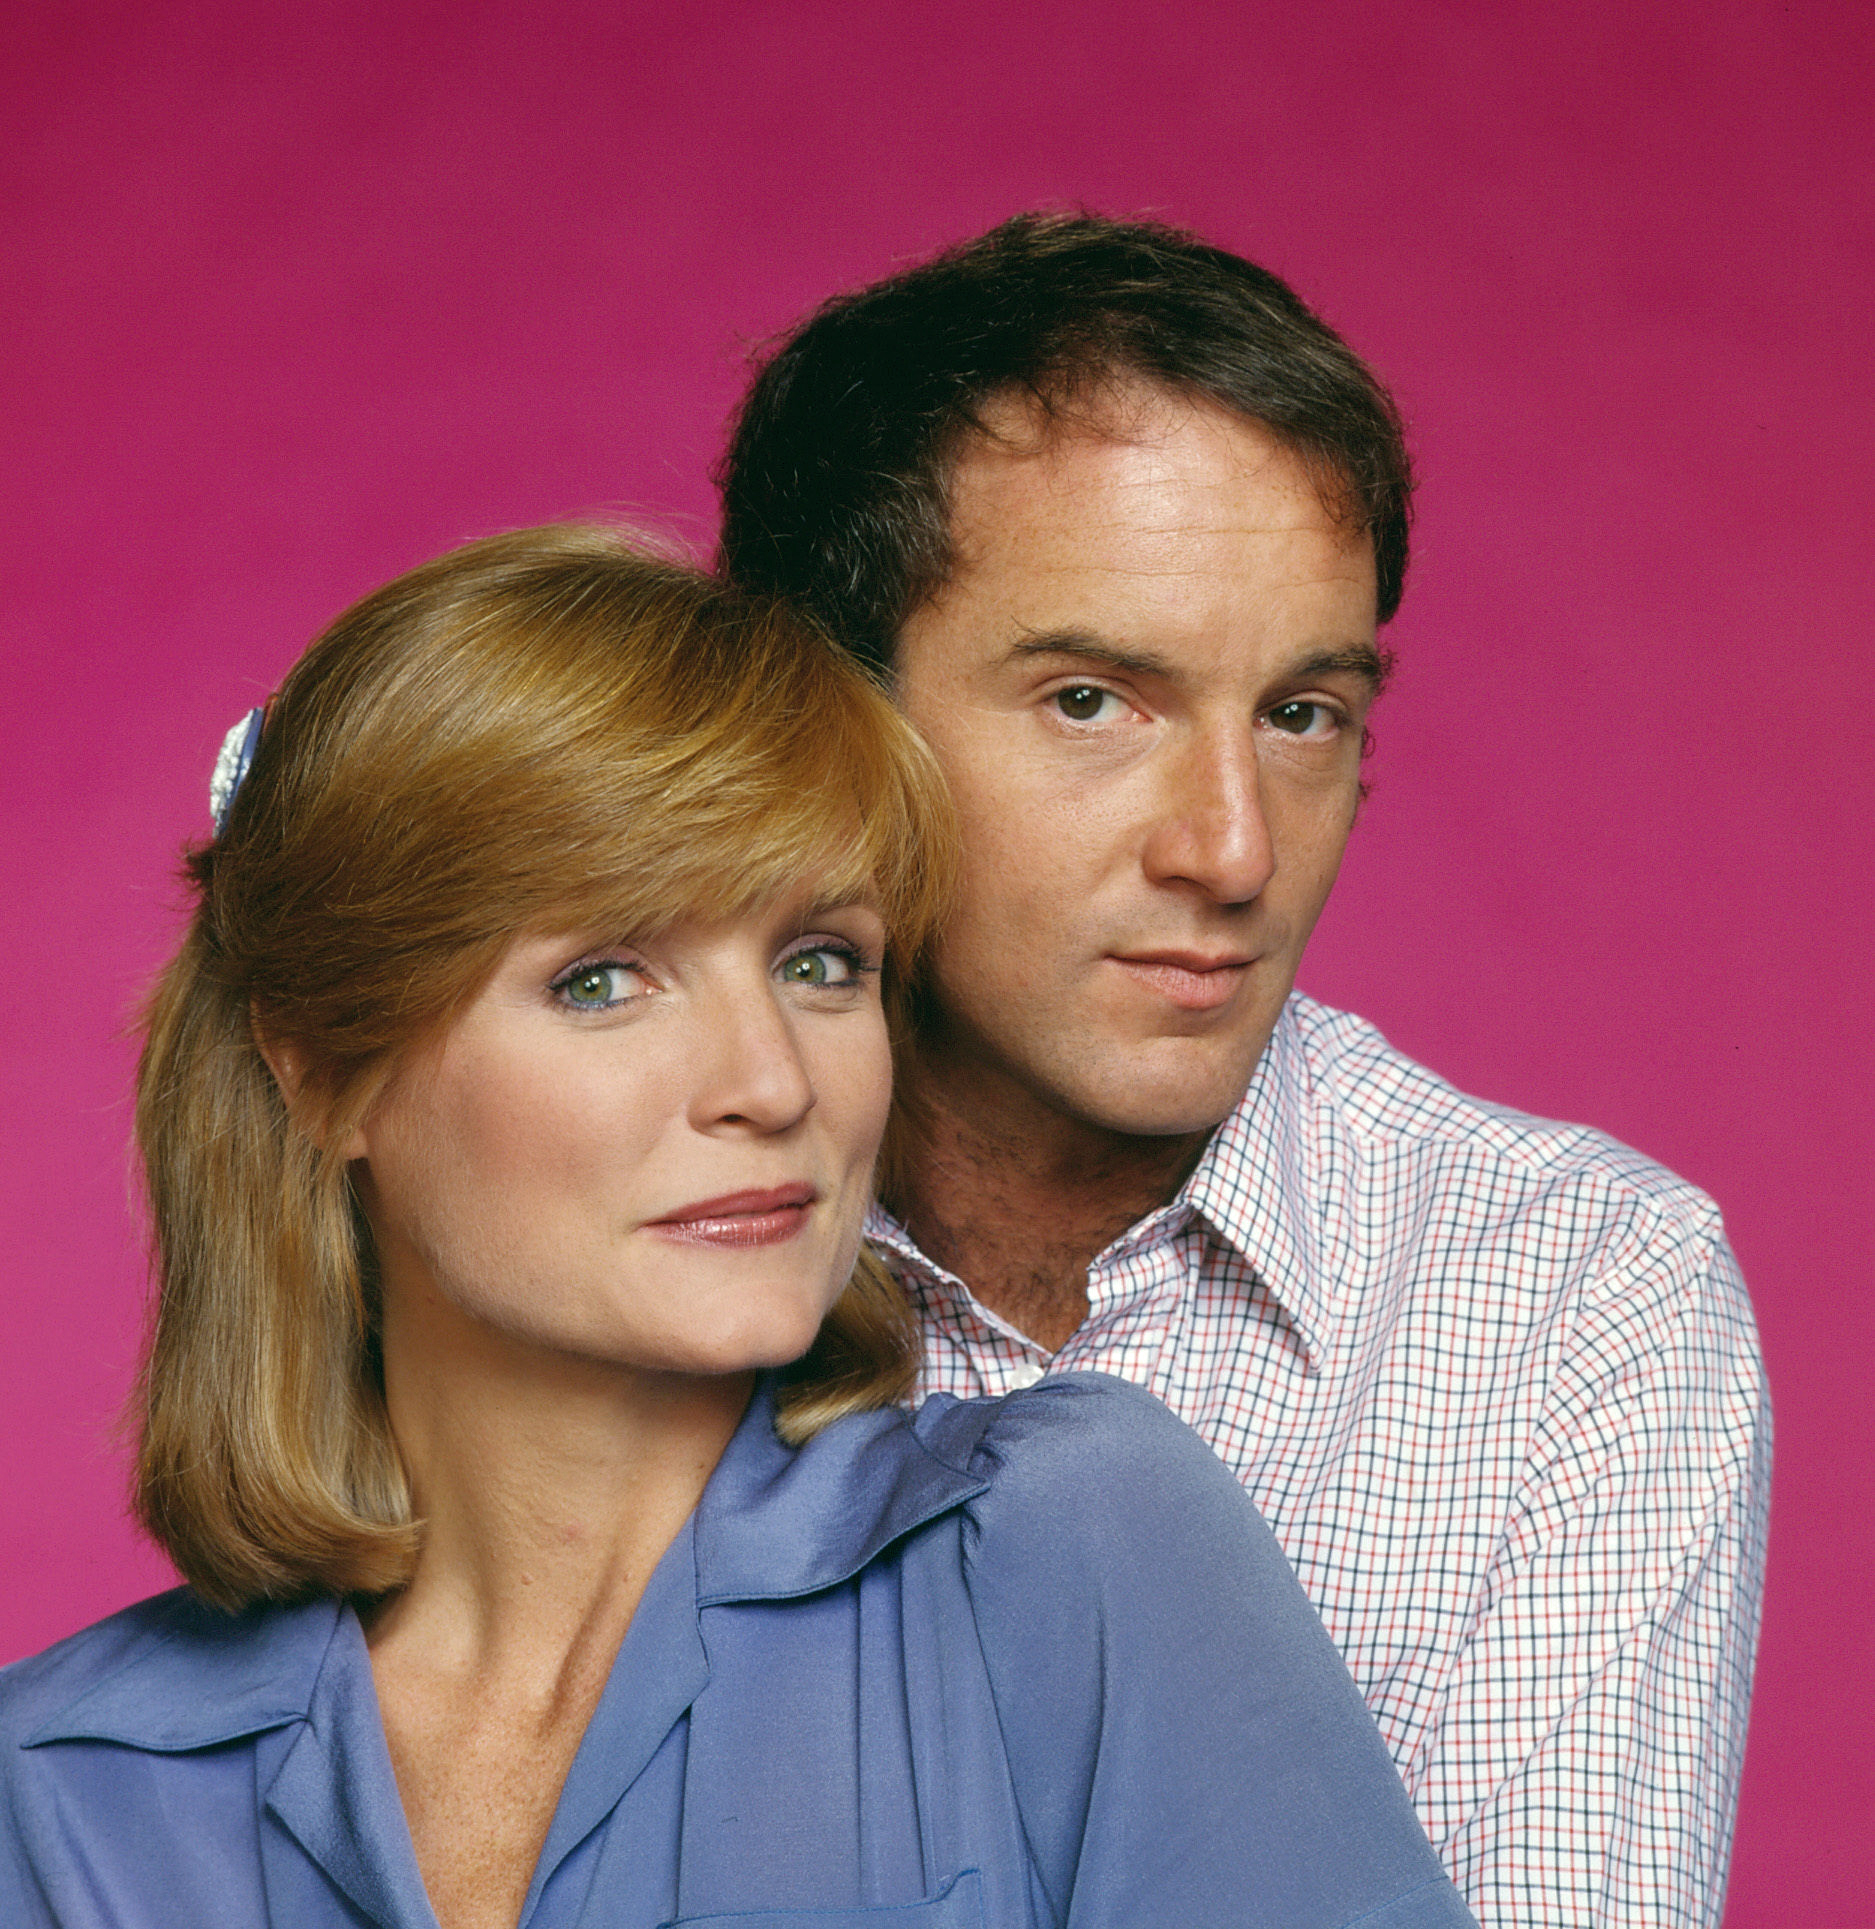 Constance McCashin as Laura Avery and John Pleshette as Richard Avery in "Knots Landing" in November 1979 in Los Angeles |  Source: Getty Images